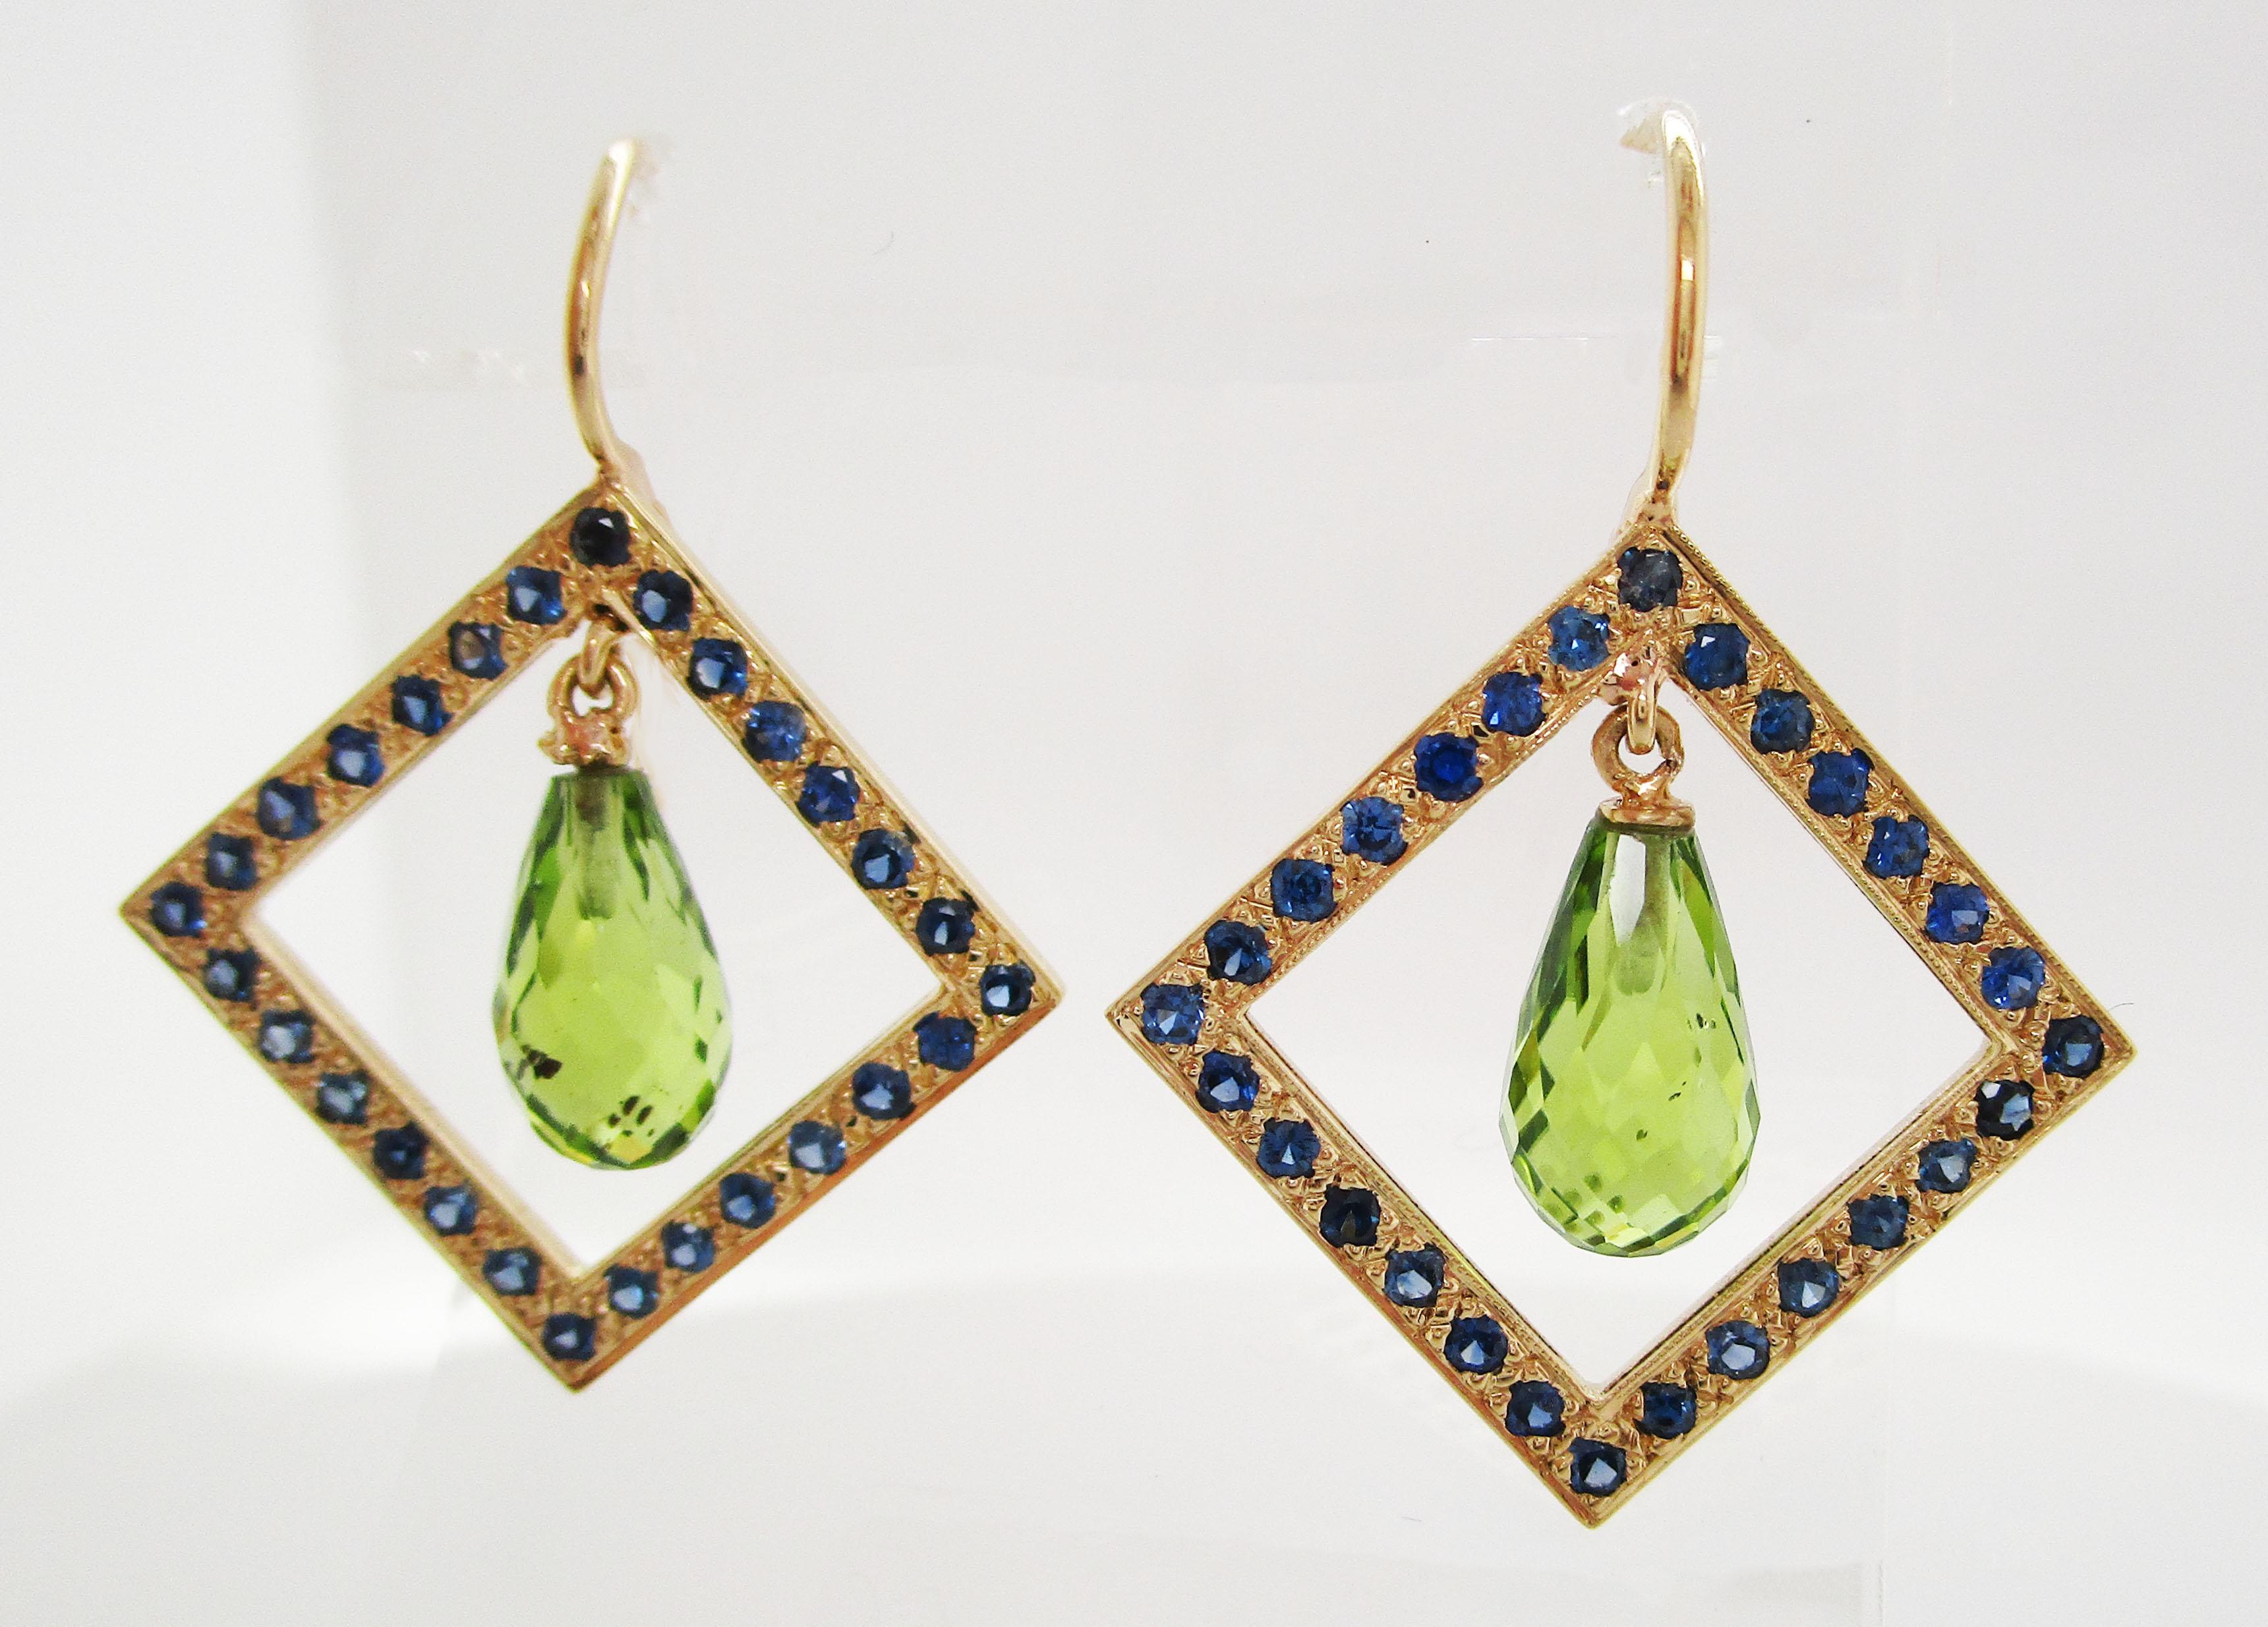 This is a fantastic pair of drop earrings in 18k yellow gold with a unique geometric design featuring a frame of bright blue sapphires and a gorgeous peridot drop center. The square design frames the suspended briolette peridot center to create a